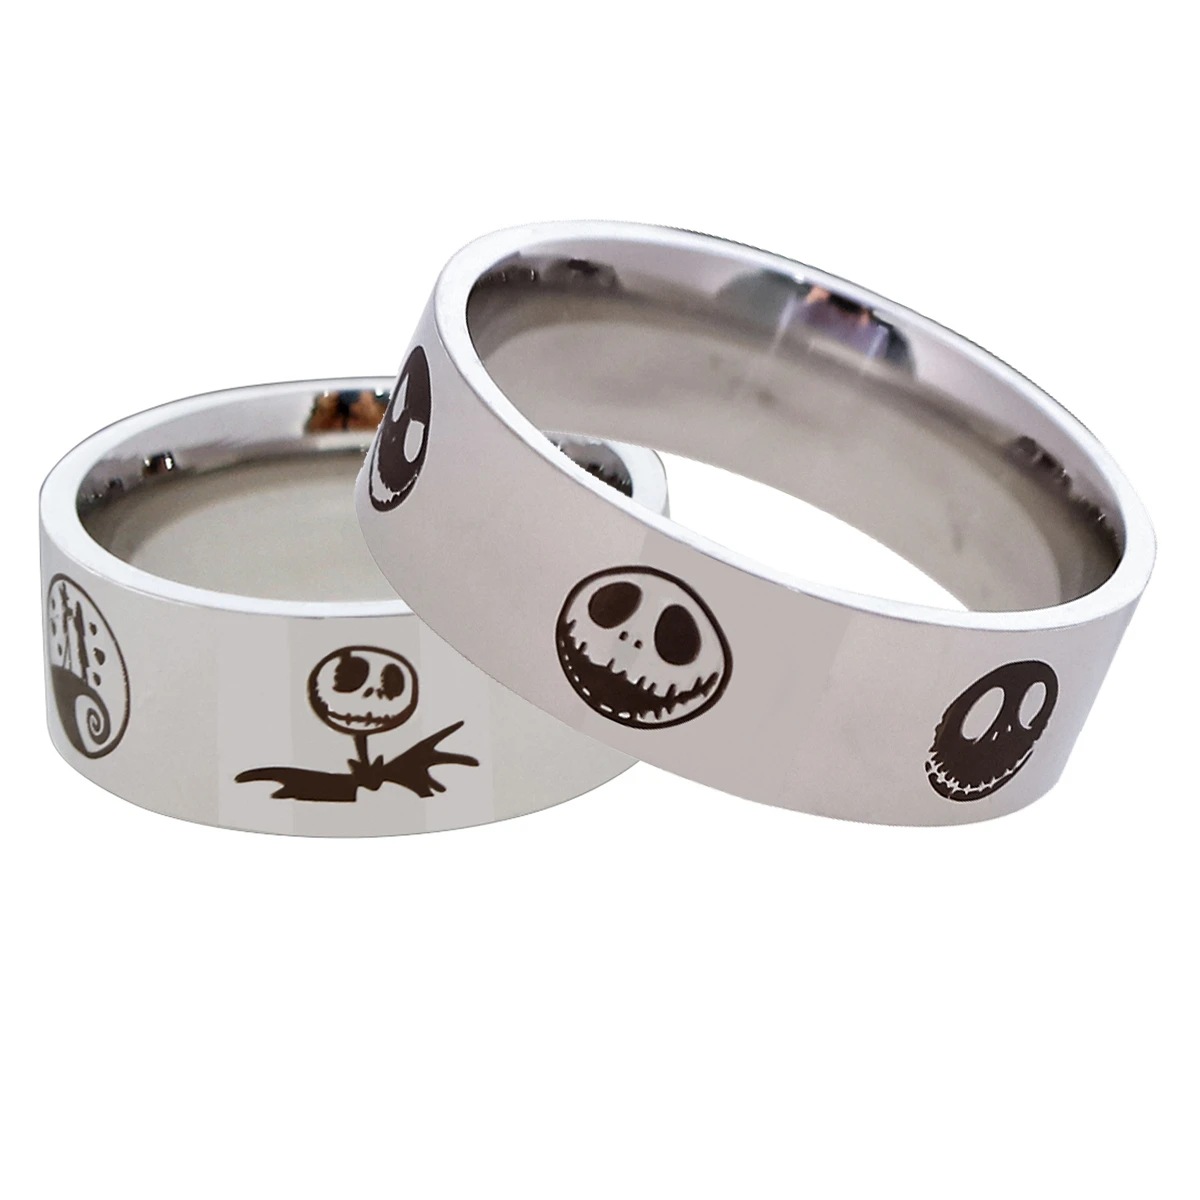 The Nightmare Before Christmas anime ring No. 7-12